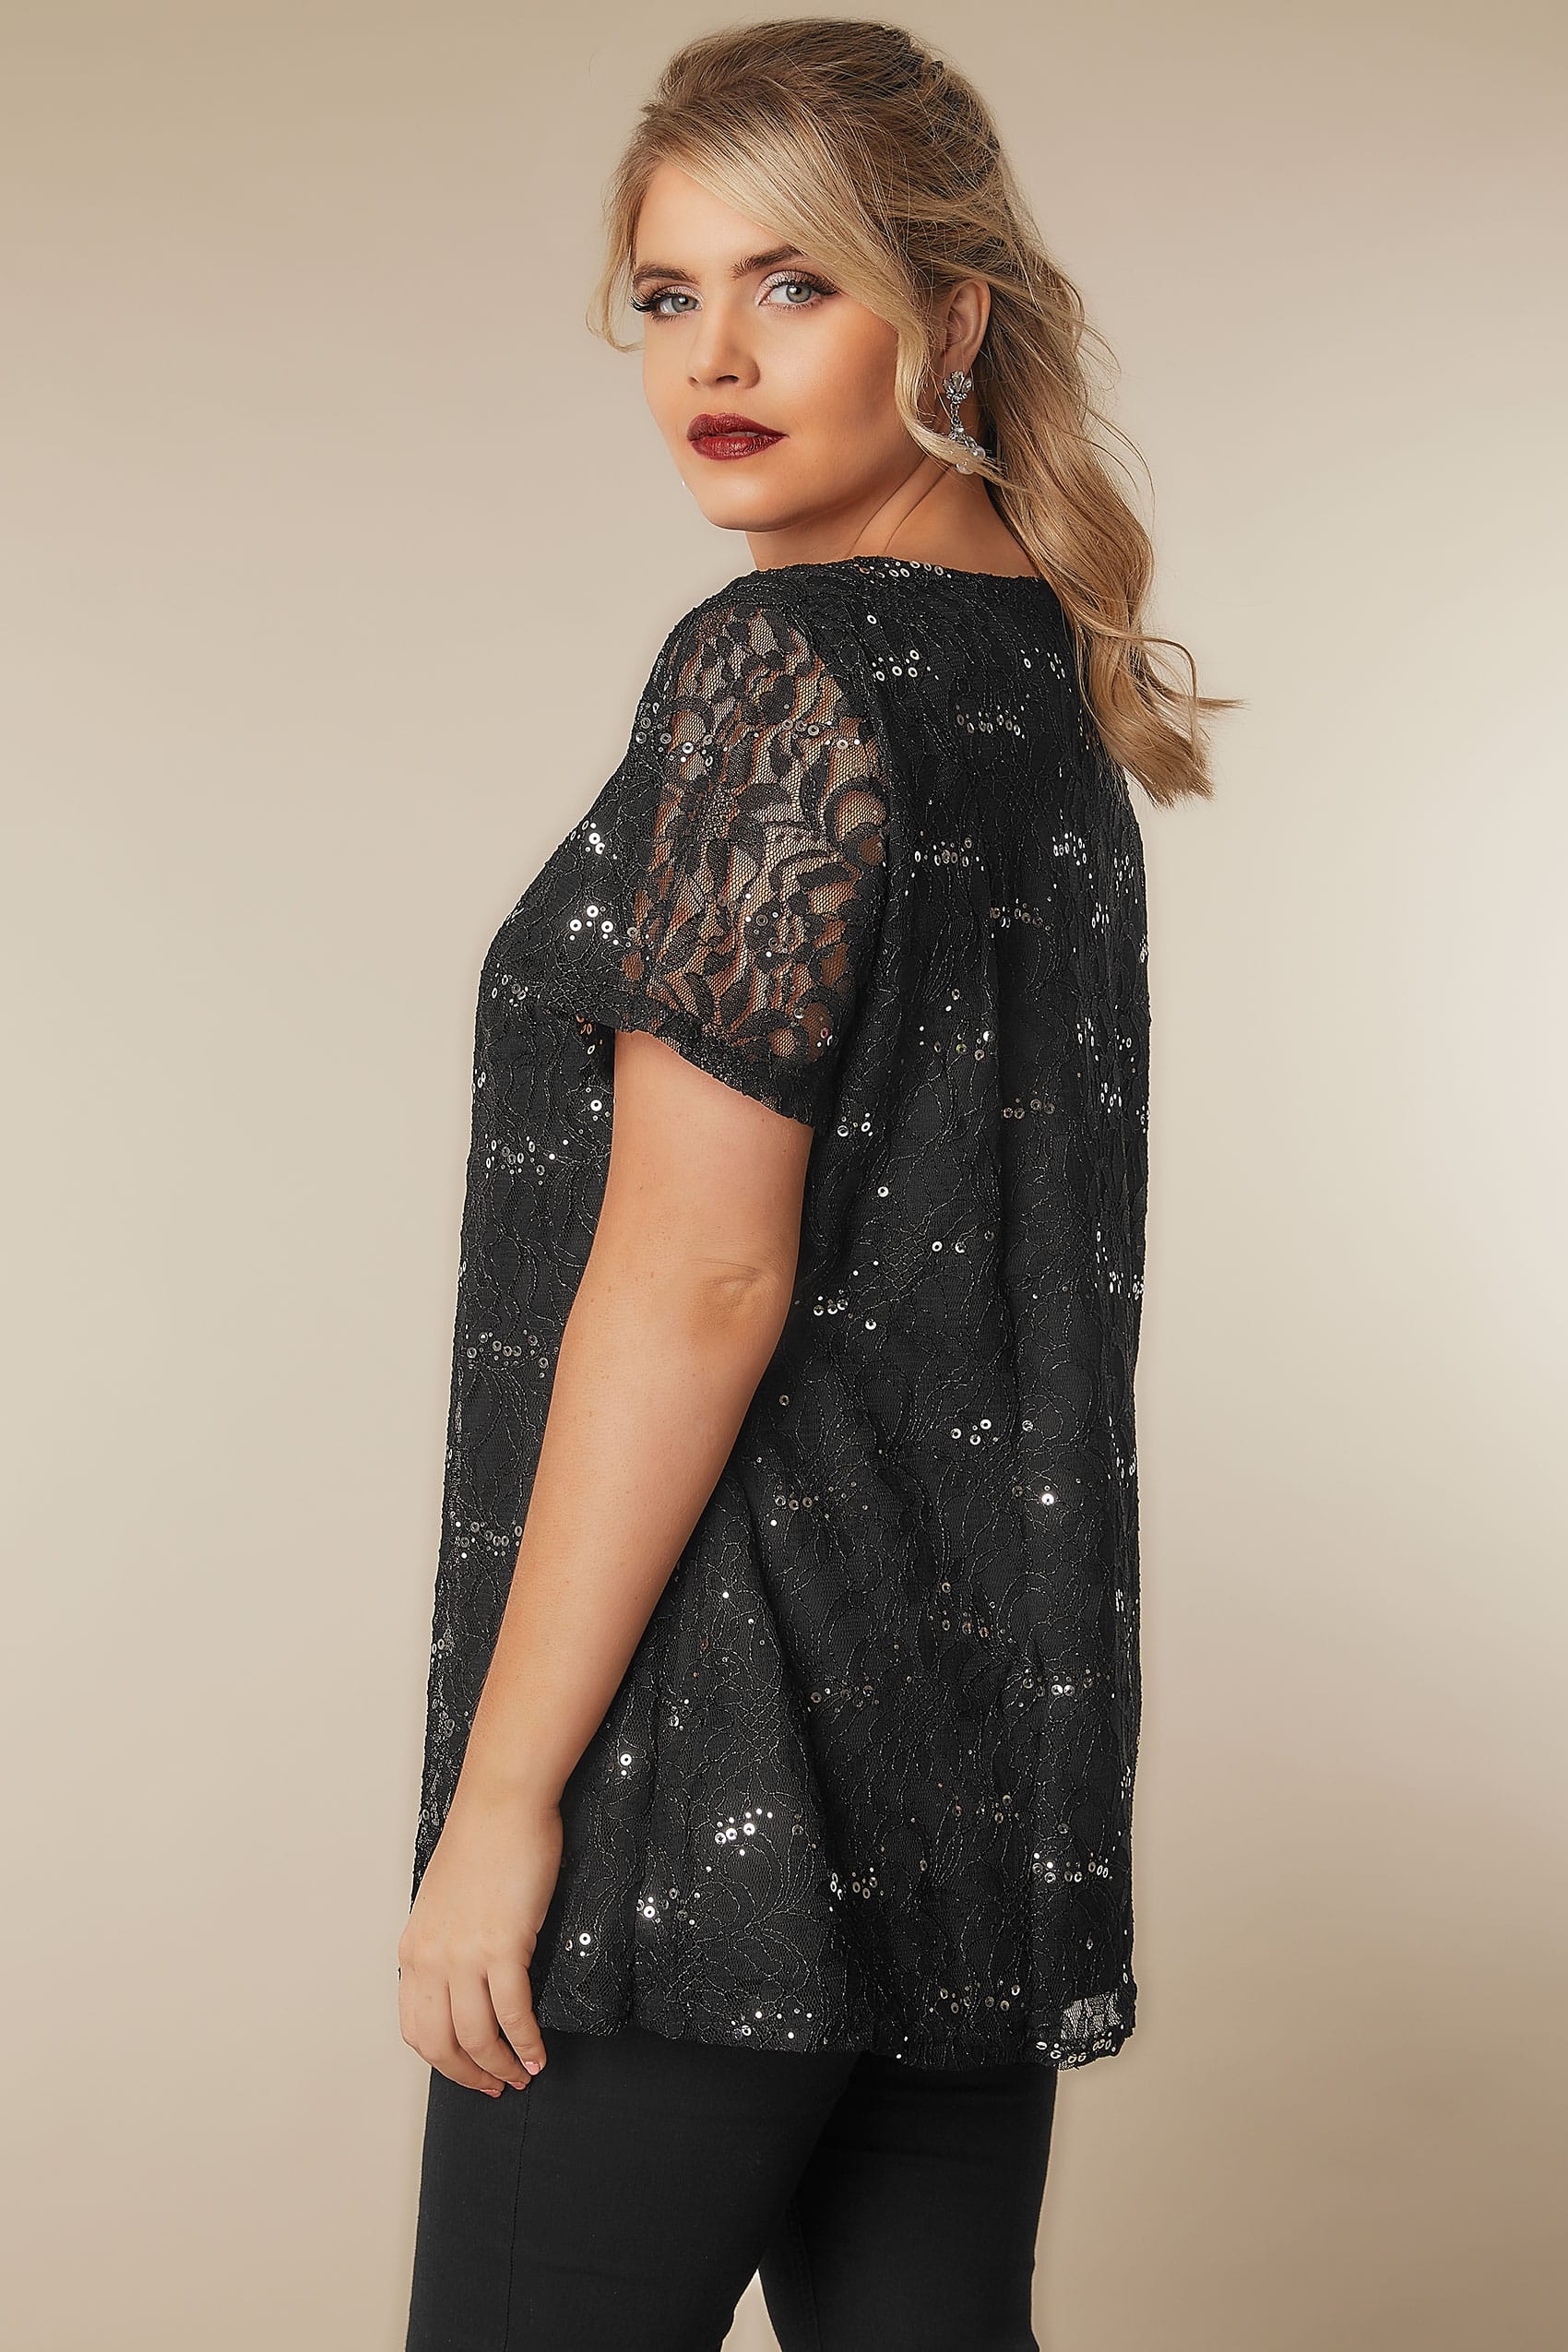 Black Lace Shell Top With Sequin Details, Plus size 16 to 36